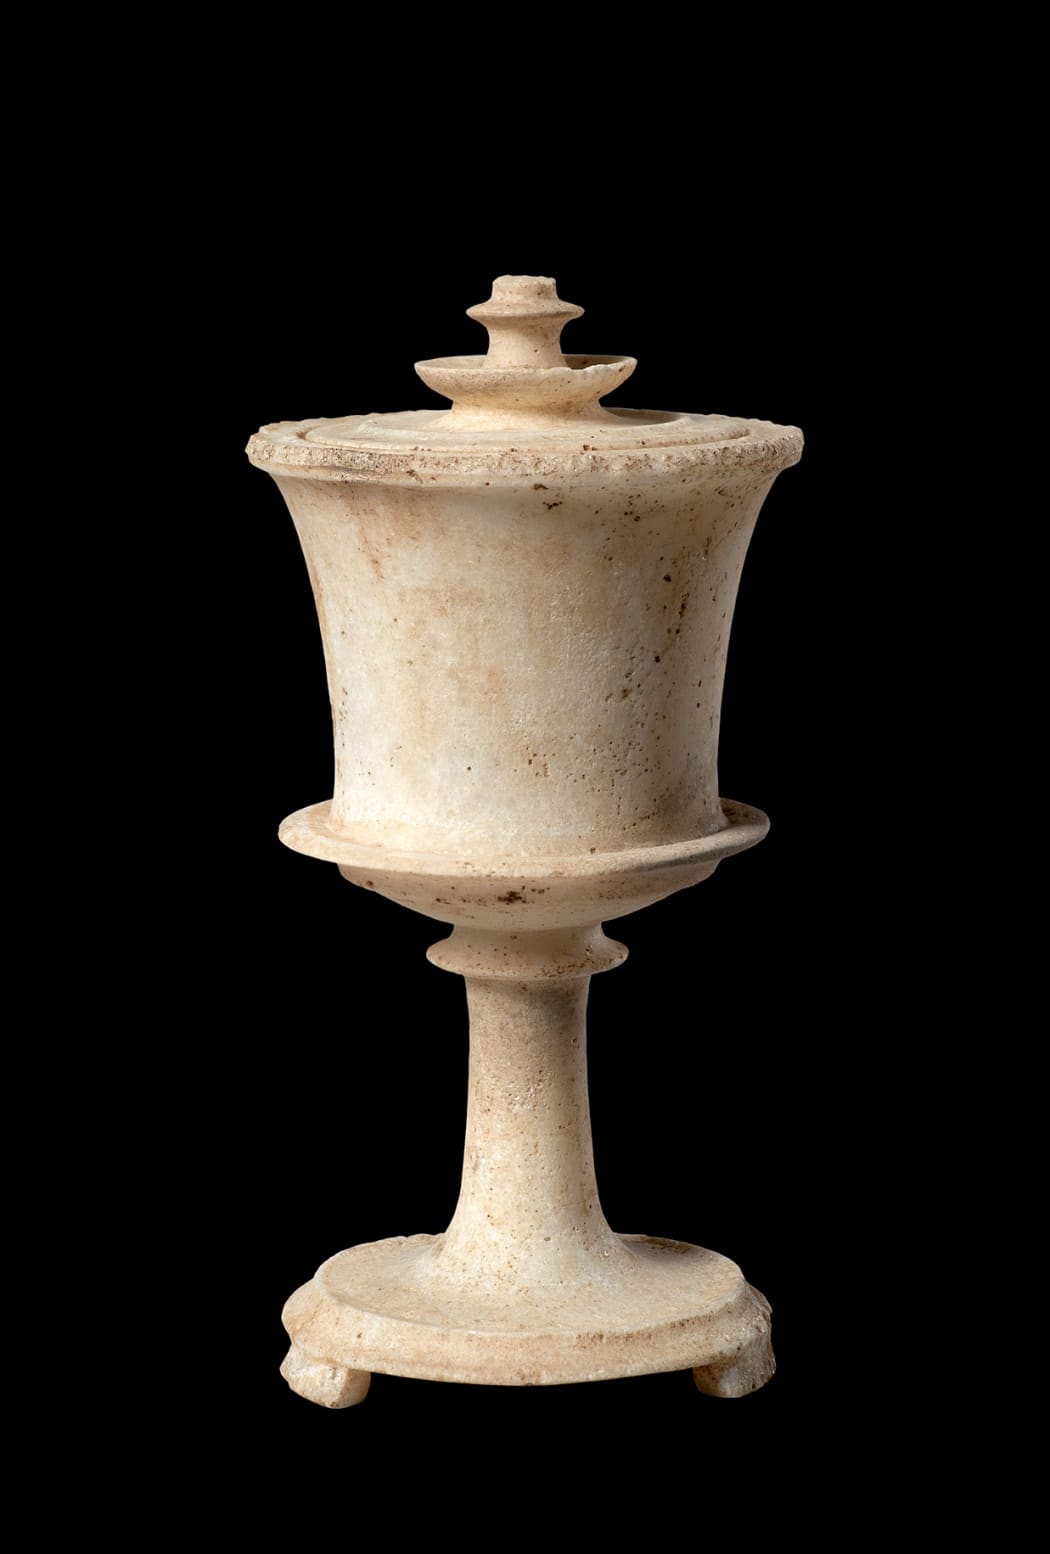 THE SCHUSTER PYXIS, A GREEK MARBLE LIDDED PYXIS, Classical Period, circa 440 - 400 BC